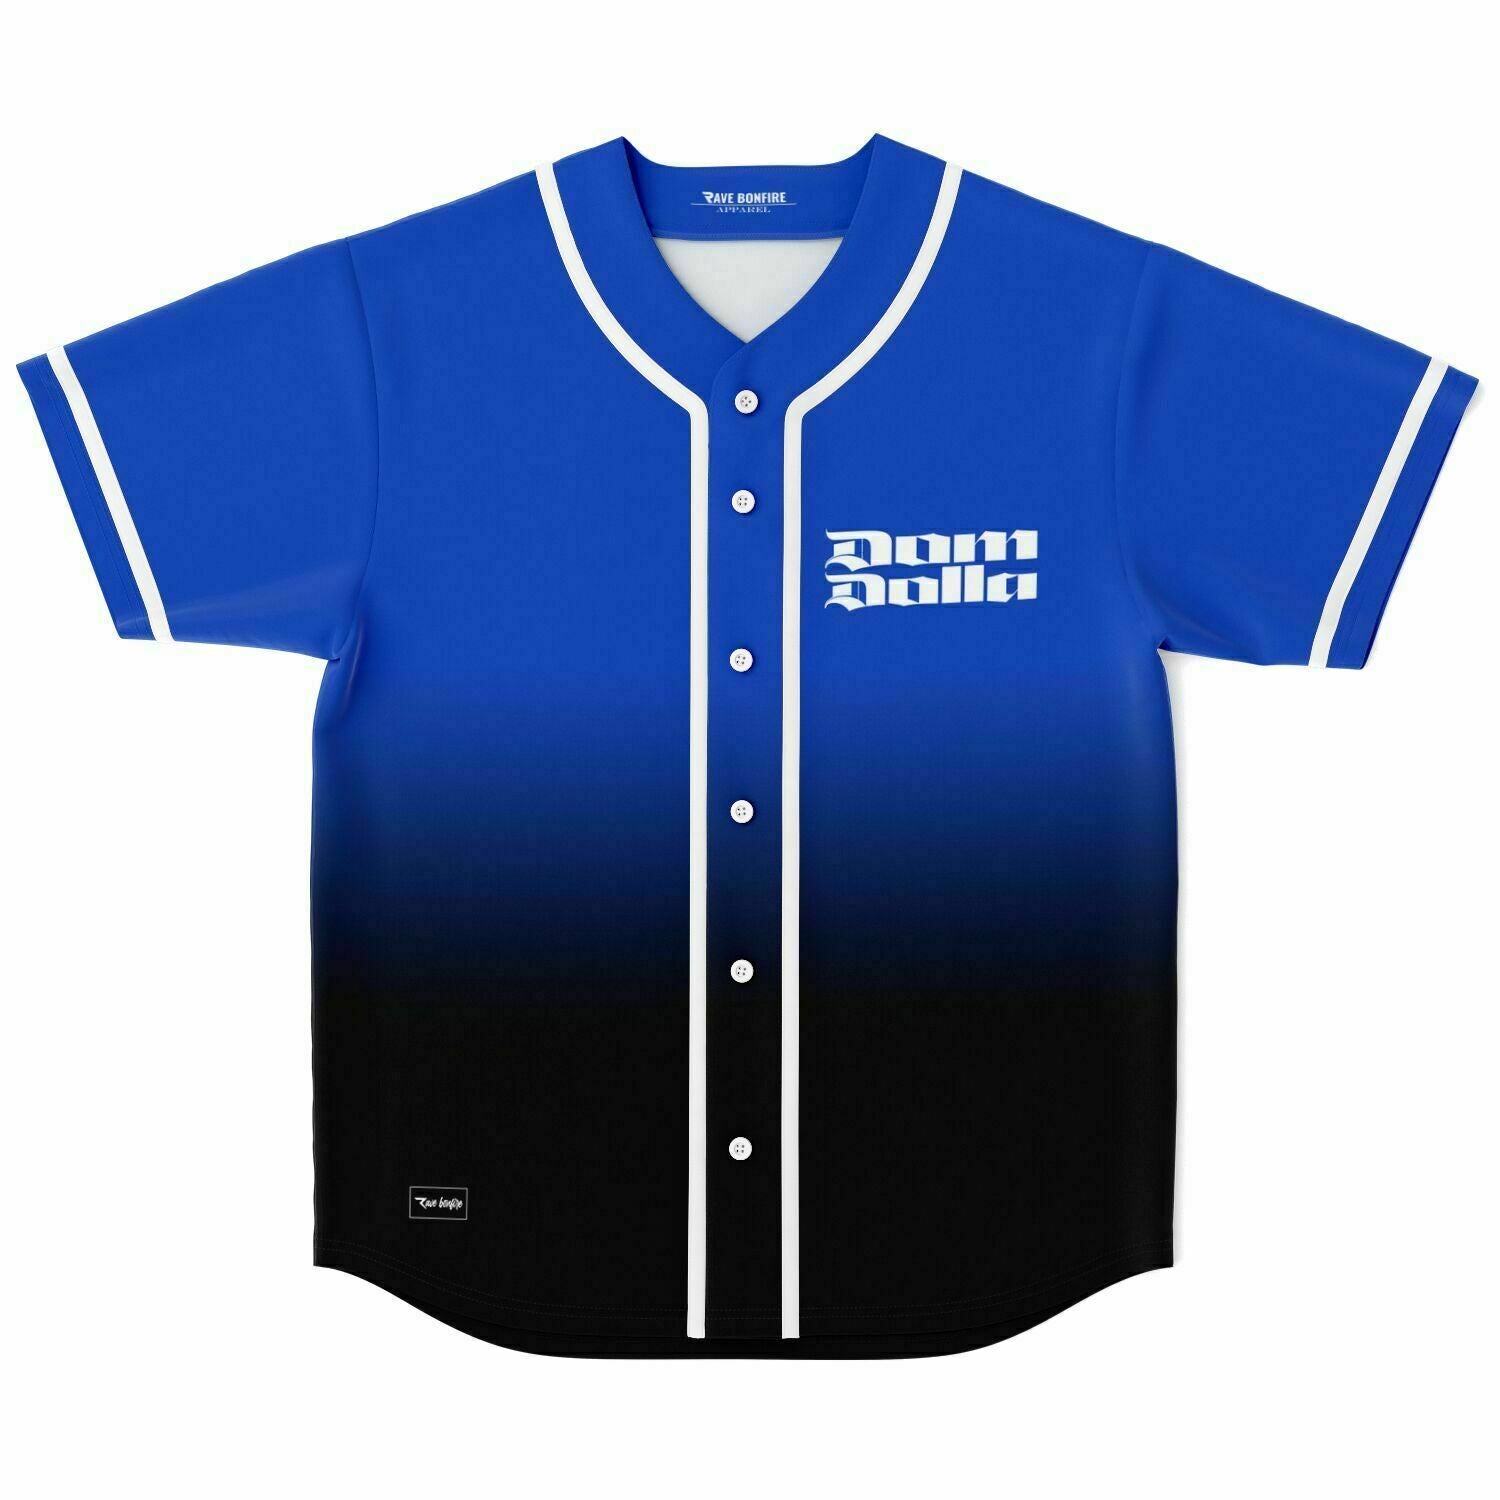 A Britany custom Baseball Jersey V1 with a black and blue design.